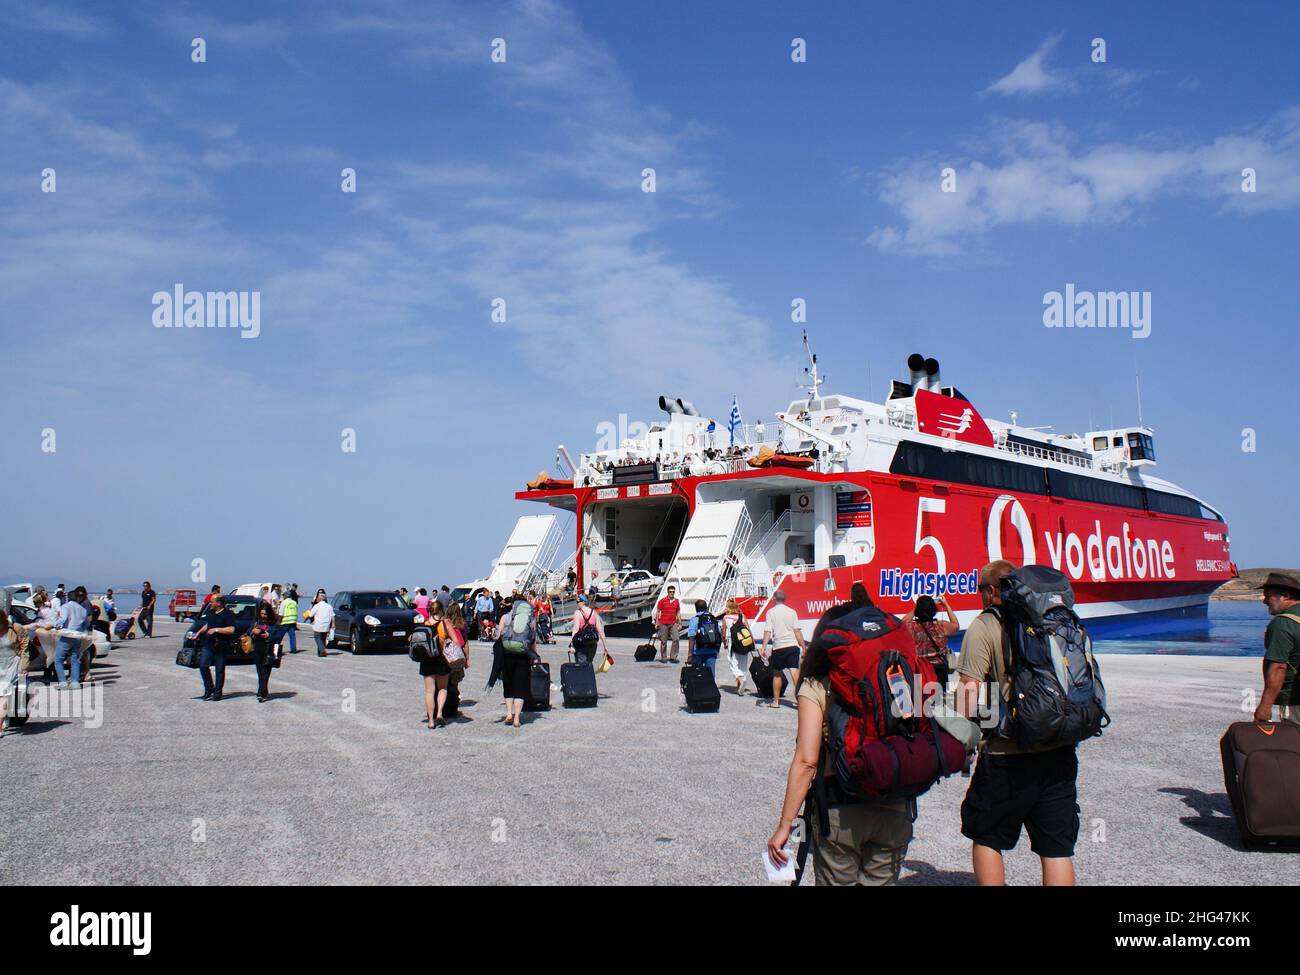 Paros island - Greece - May 13 2010 : Bustling Greek port of Parikia. Travellers board the inter island ferry, docked at the harbor.  Landscape aspect Stock Photo